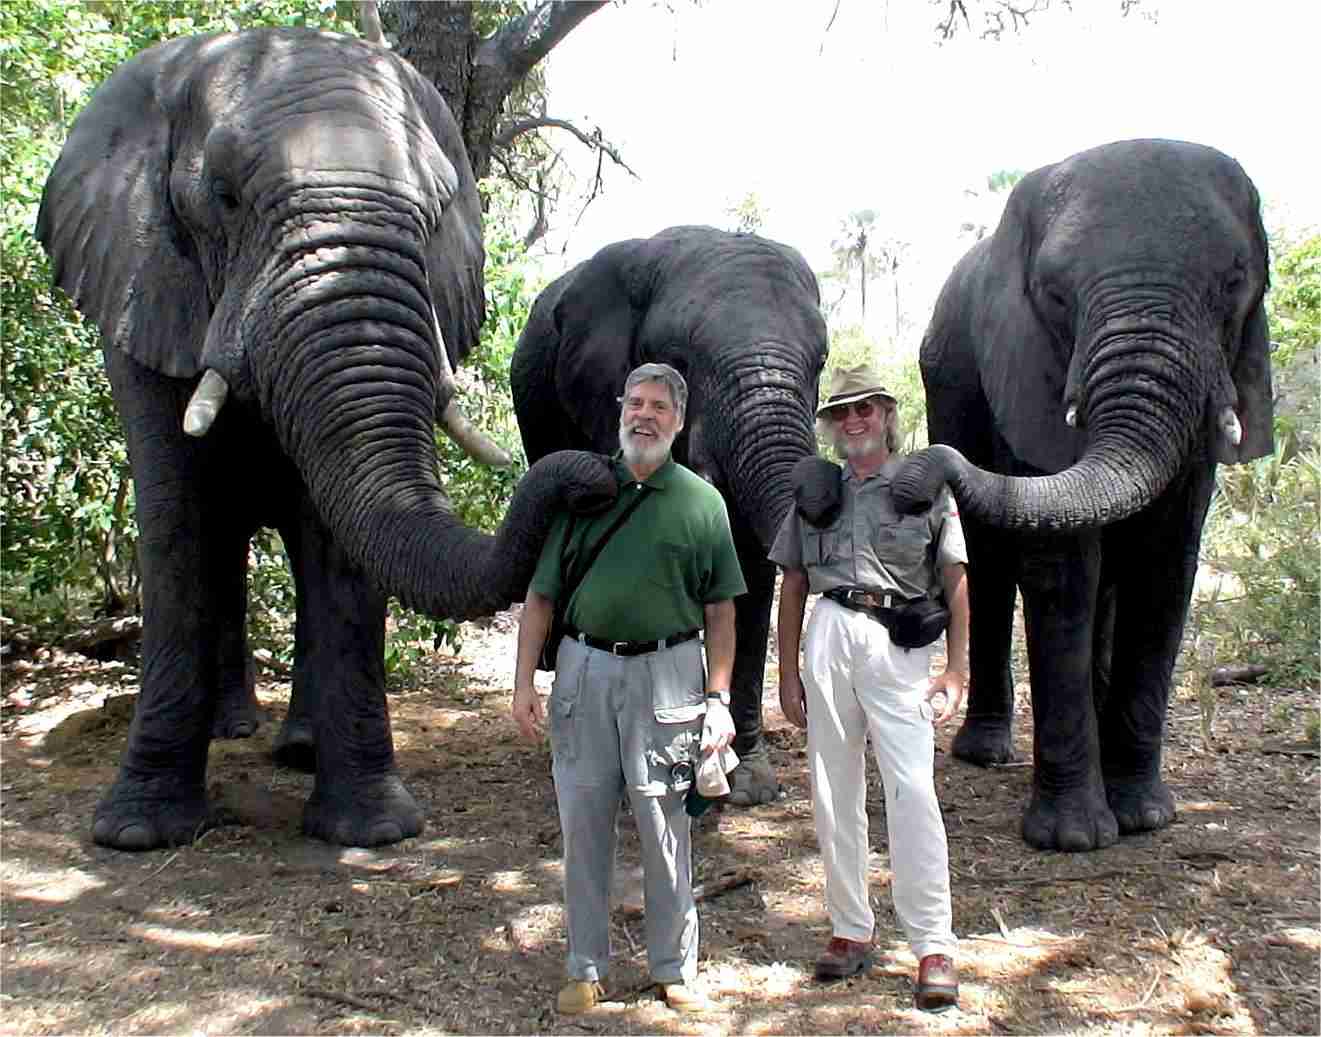 Jim and I pose with two elephants